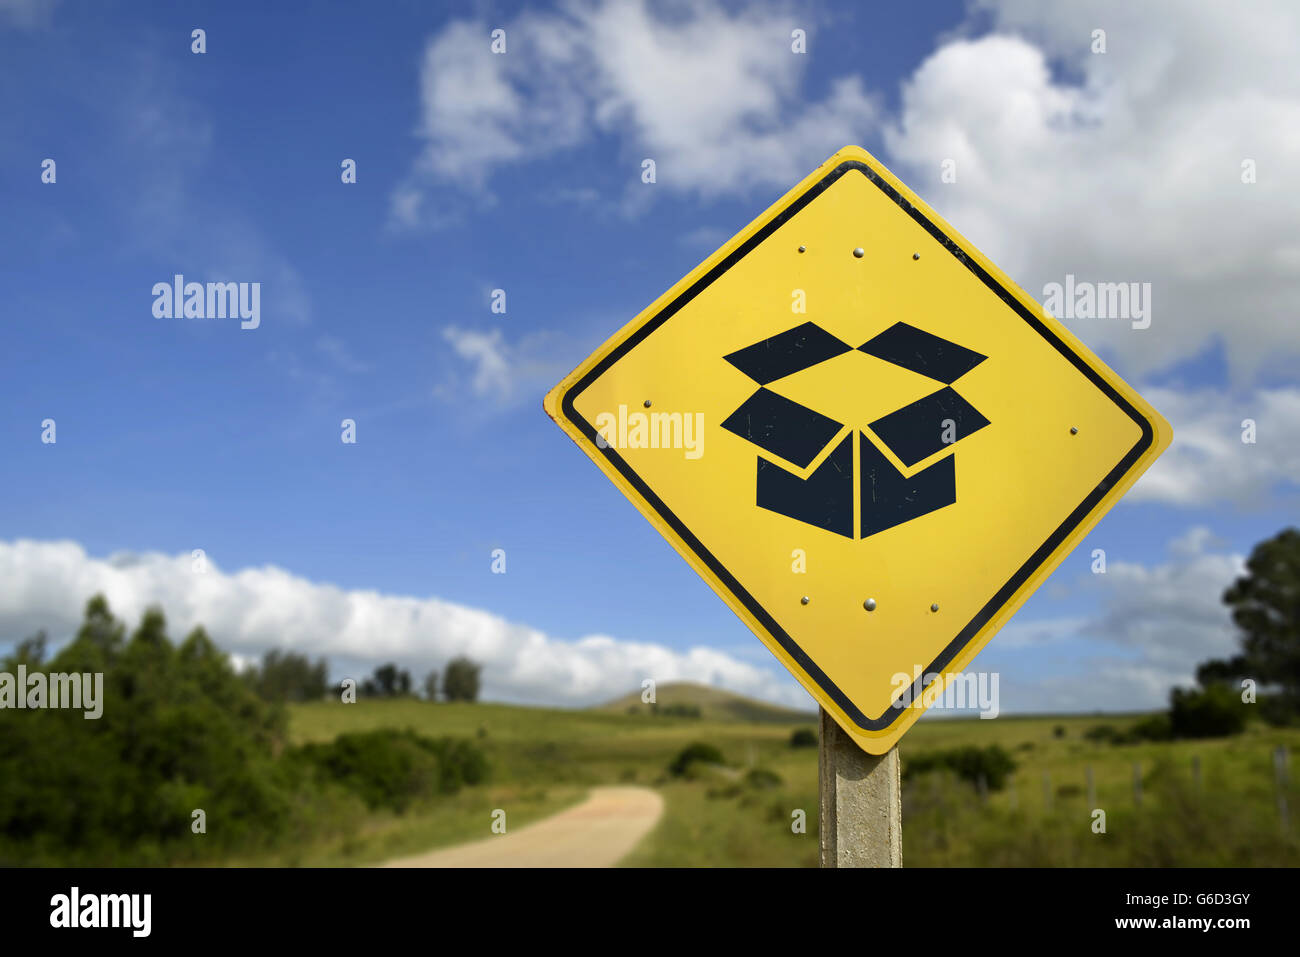 Fast package delivery service anywhere concept. Road sign with open box icon in rural environment, includes copy space. Stock Photo